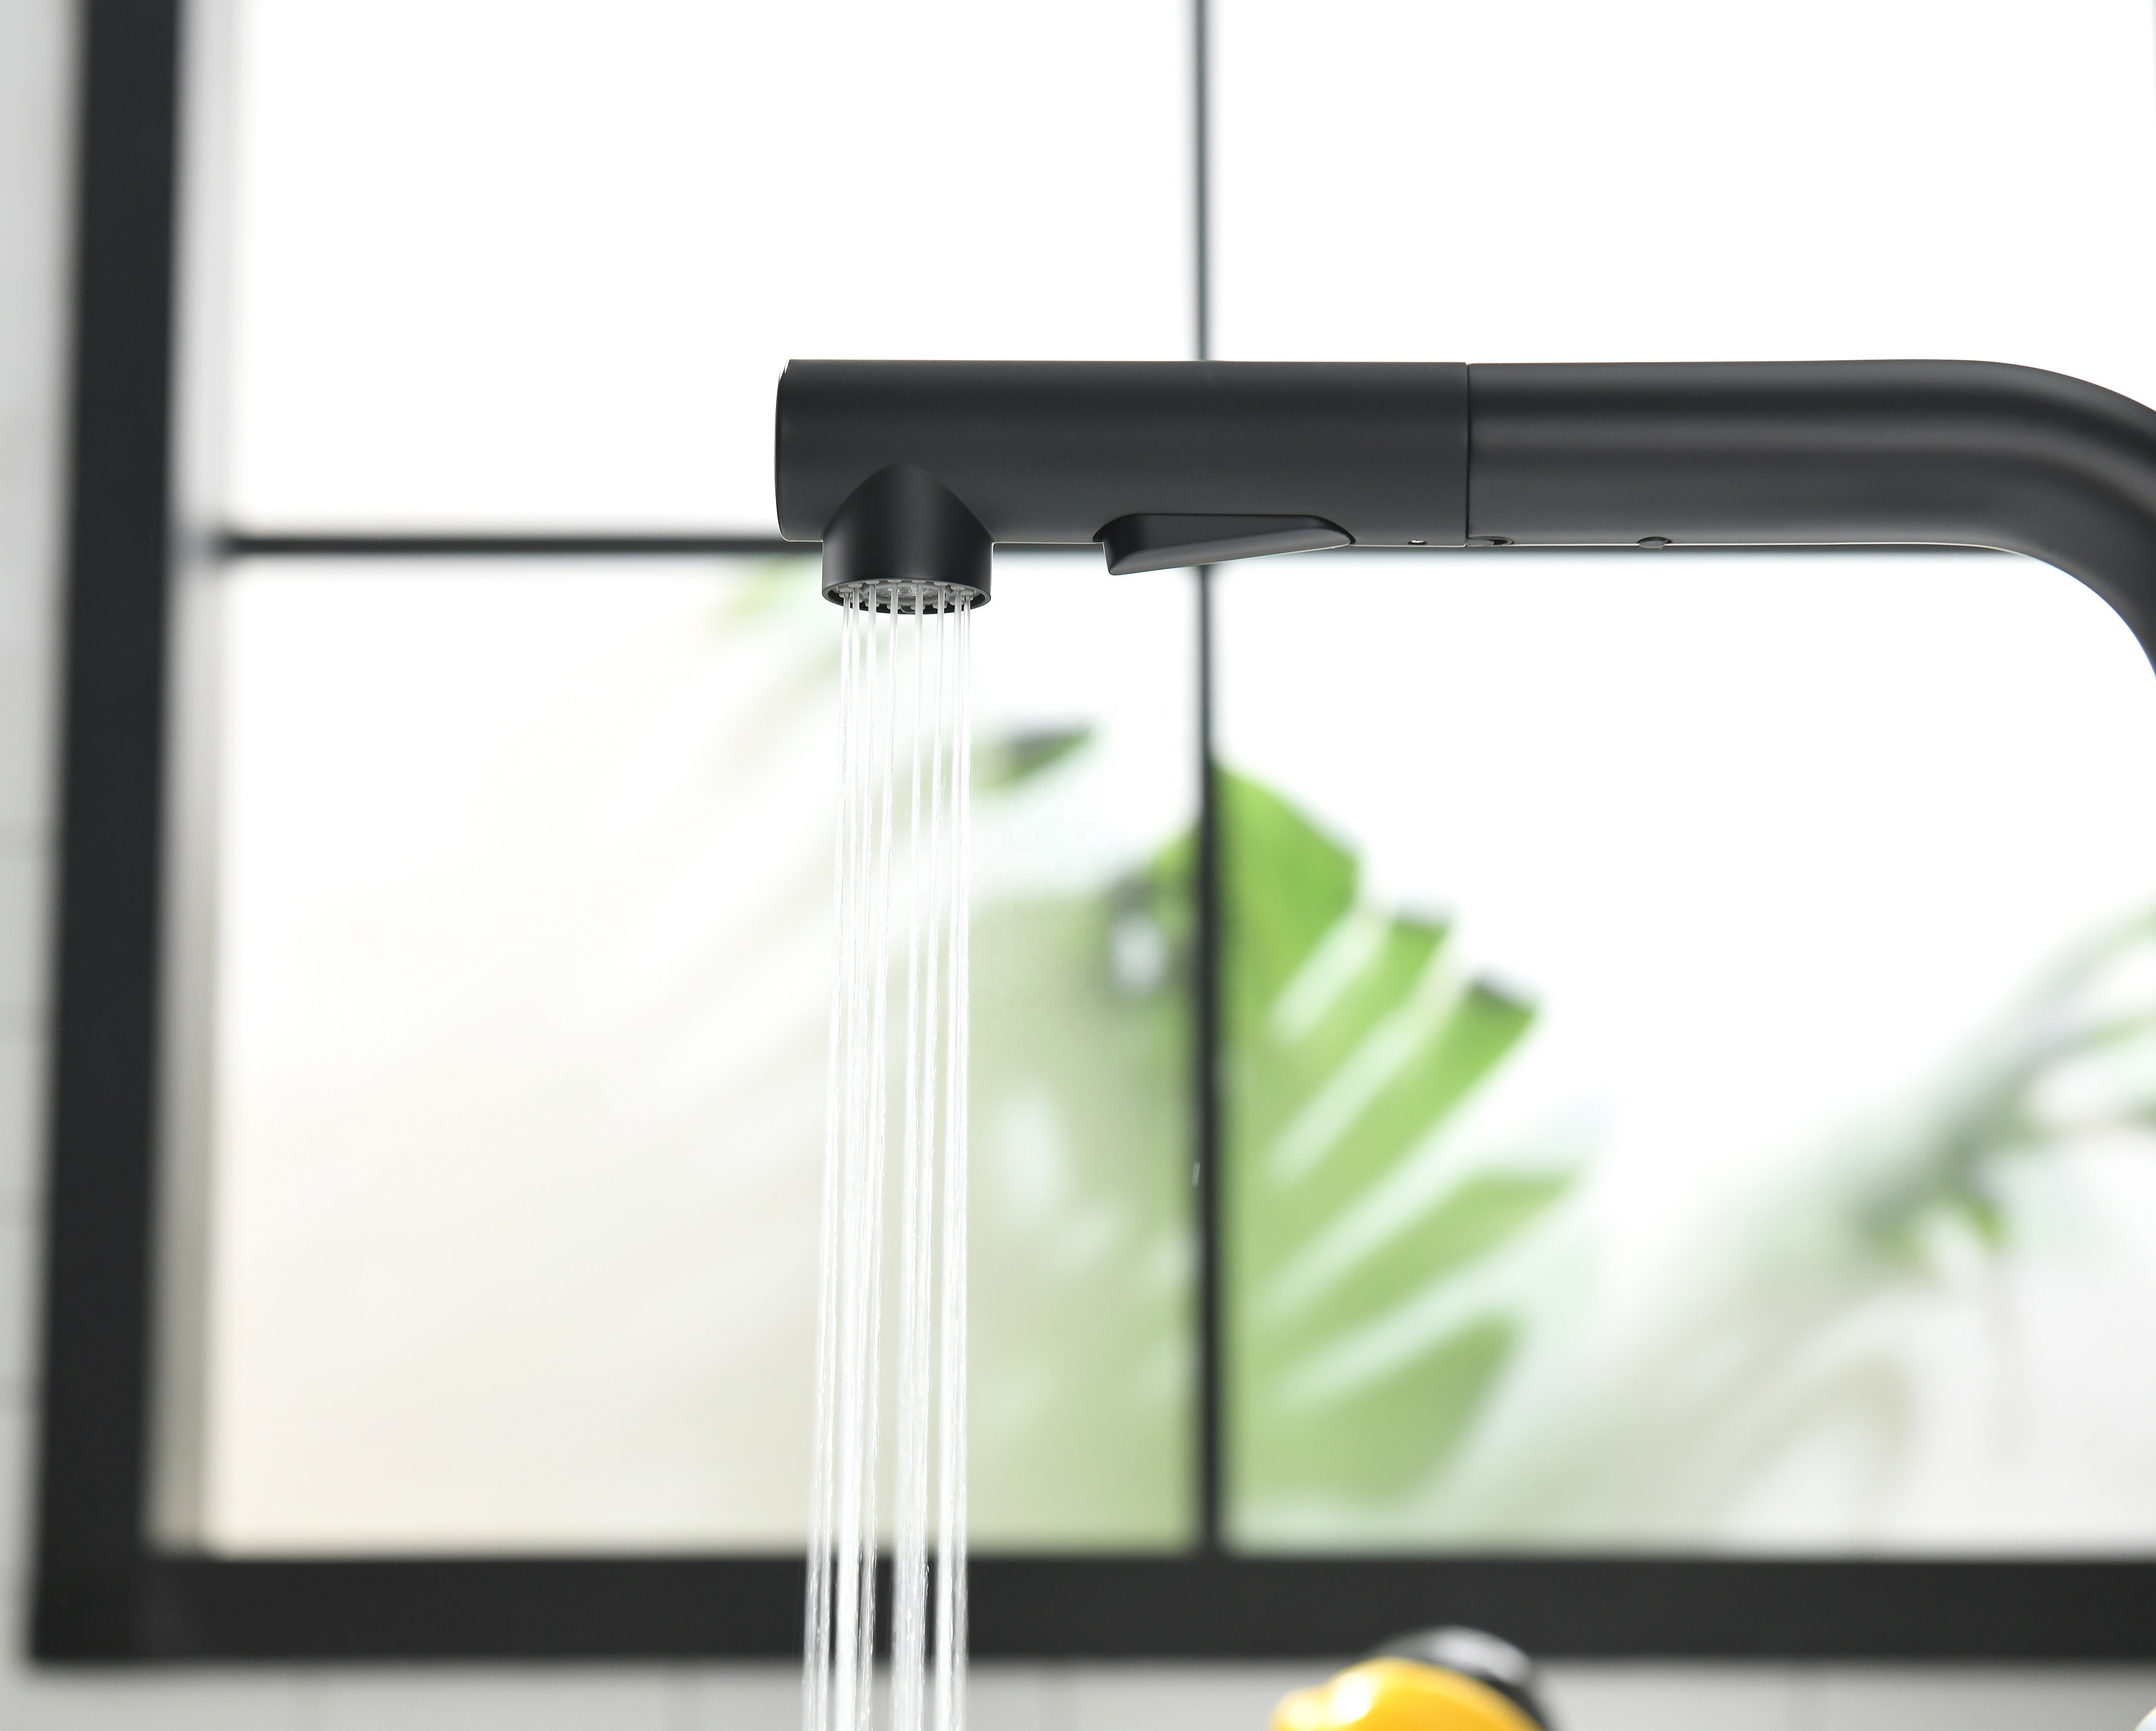 Water Faucet Spray Black Kitchen Sink Faucet Swivel Pull Out Single Handle Kitchen Faucets